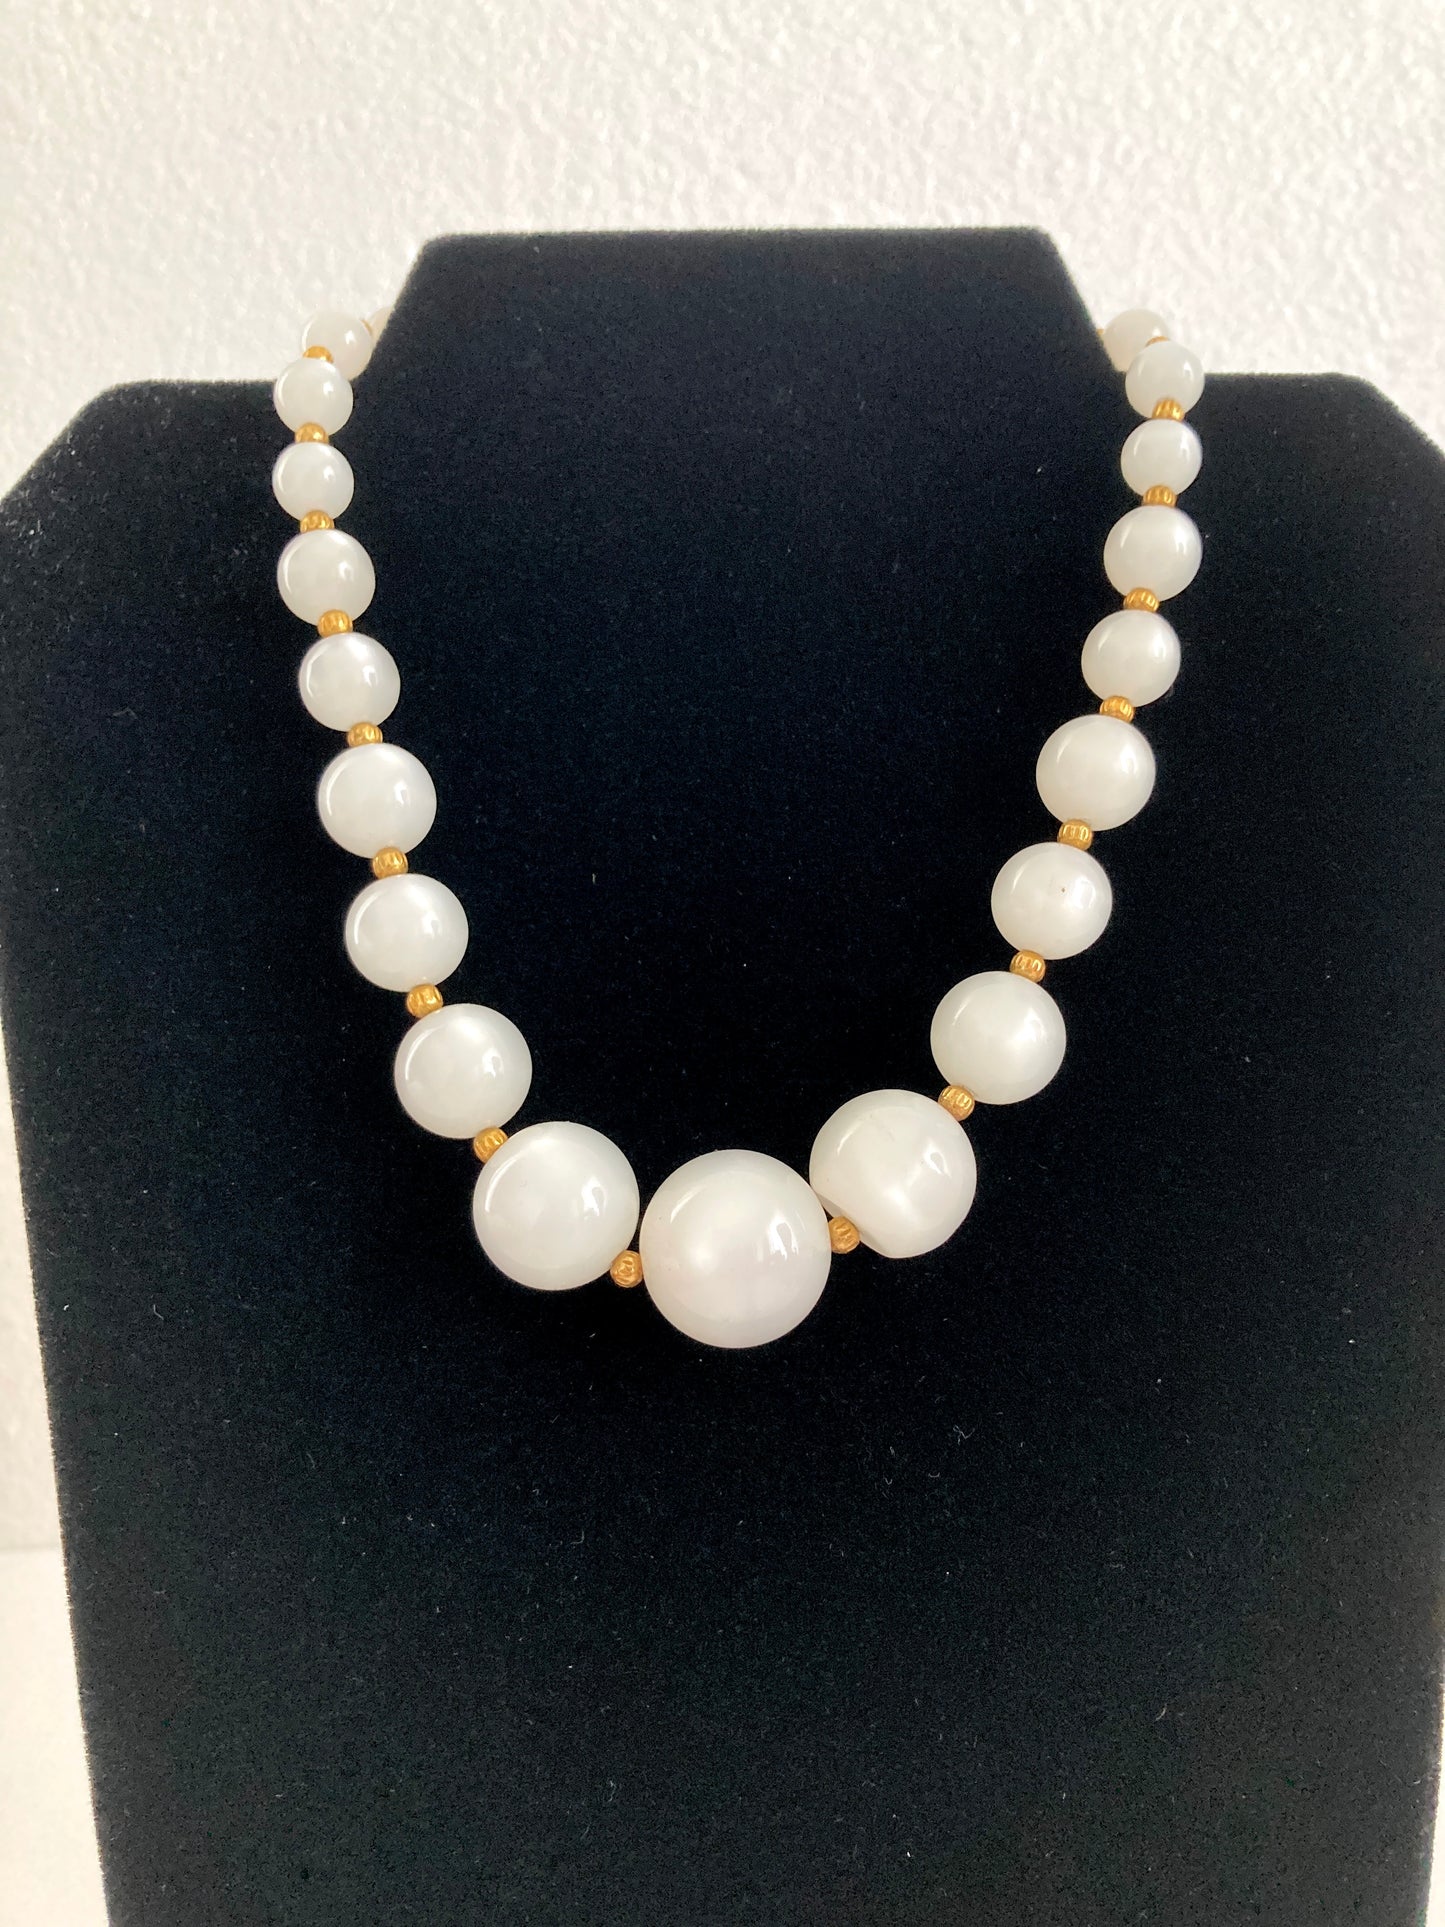 White Moonglow Graduated Bead Necklace Gold Spacers